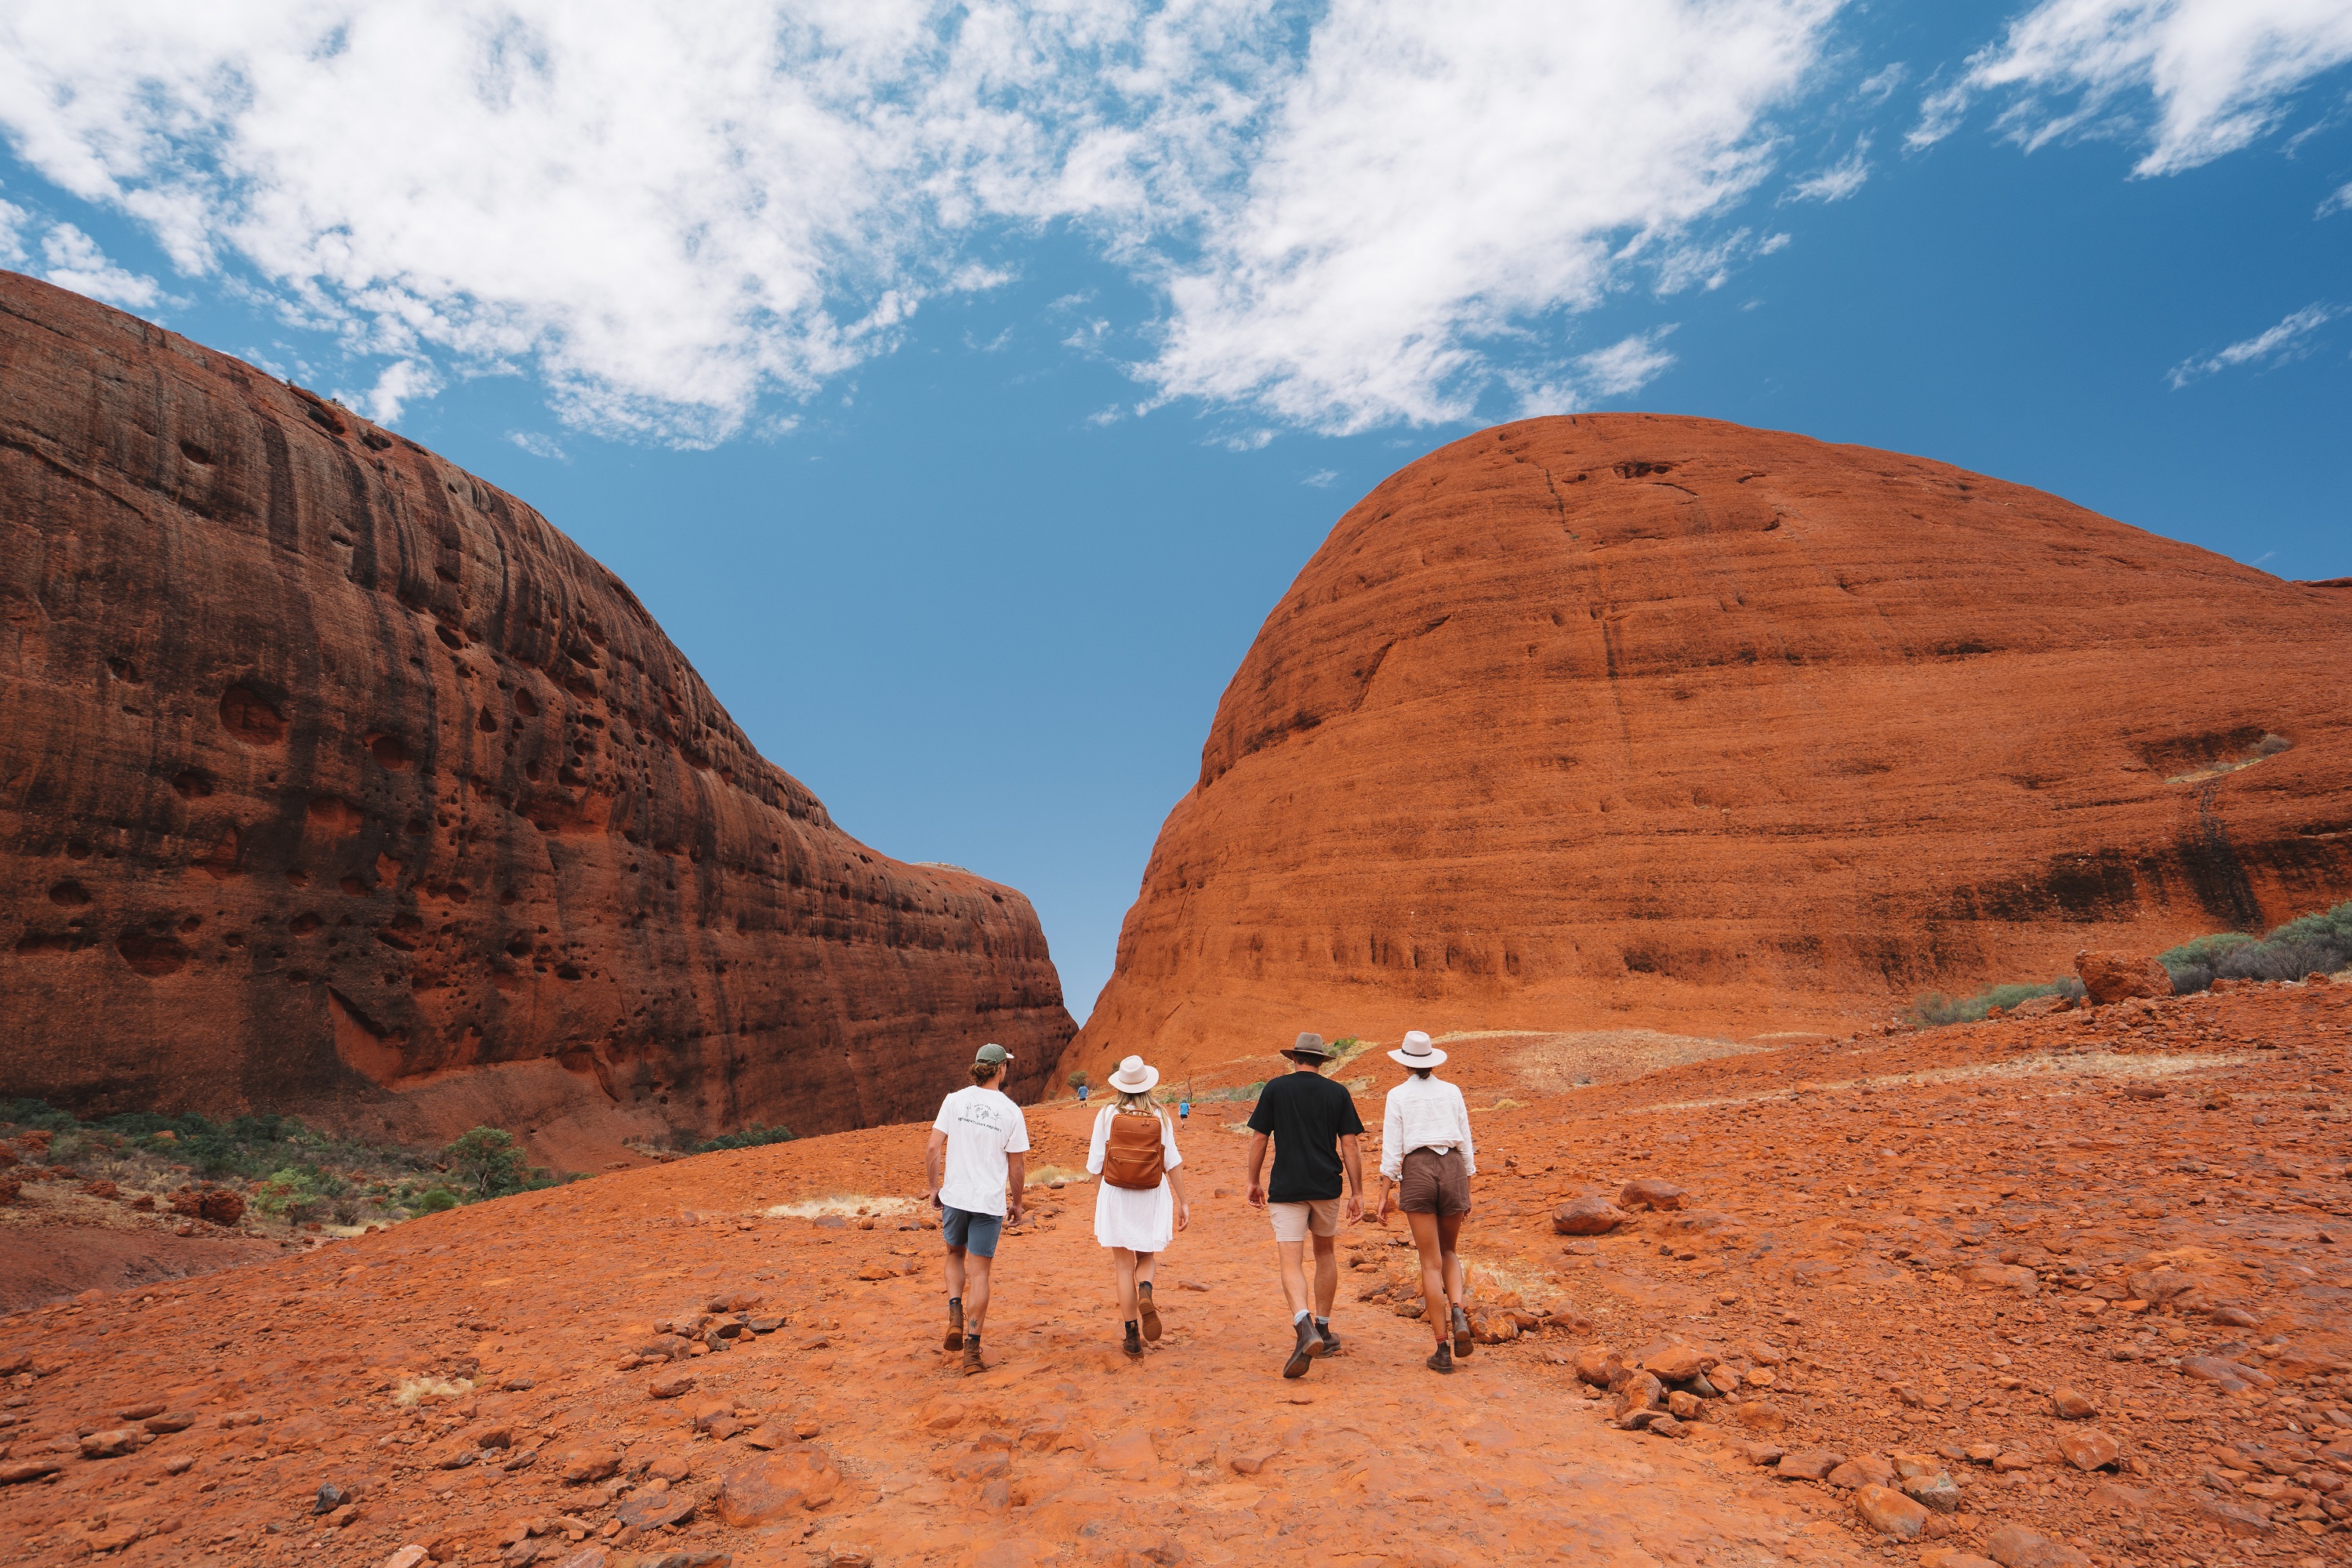  4 Day Red Centre to West MacDonnell from Alice Springs( Basic Swag): Uluru | Kata Tjuta | Kings Canyon | West MacDonnell Ranges | Standley Chasm | 